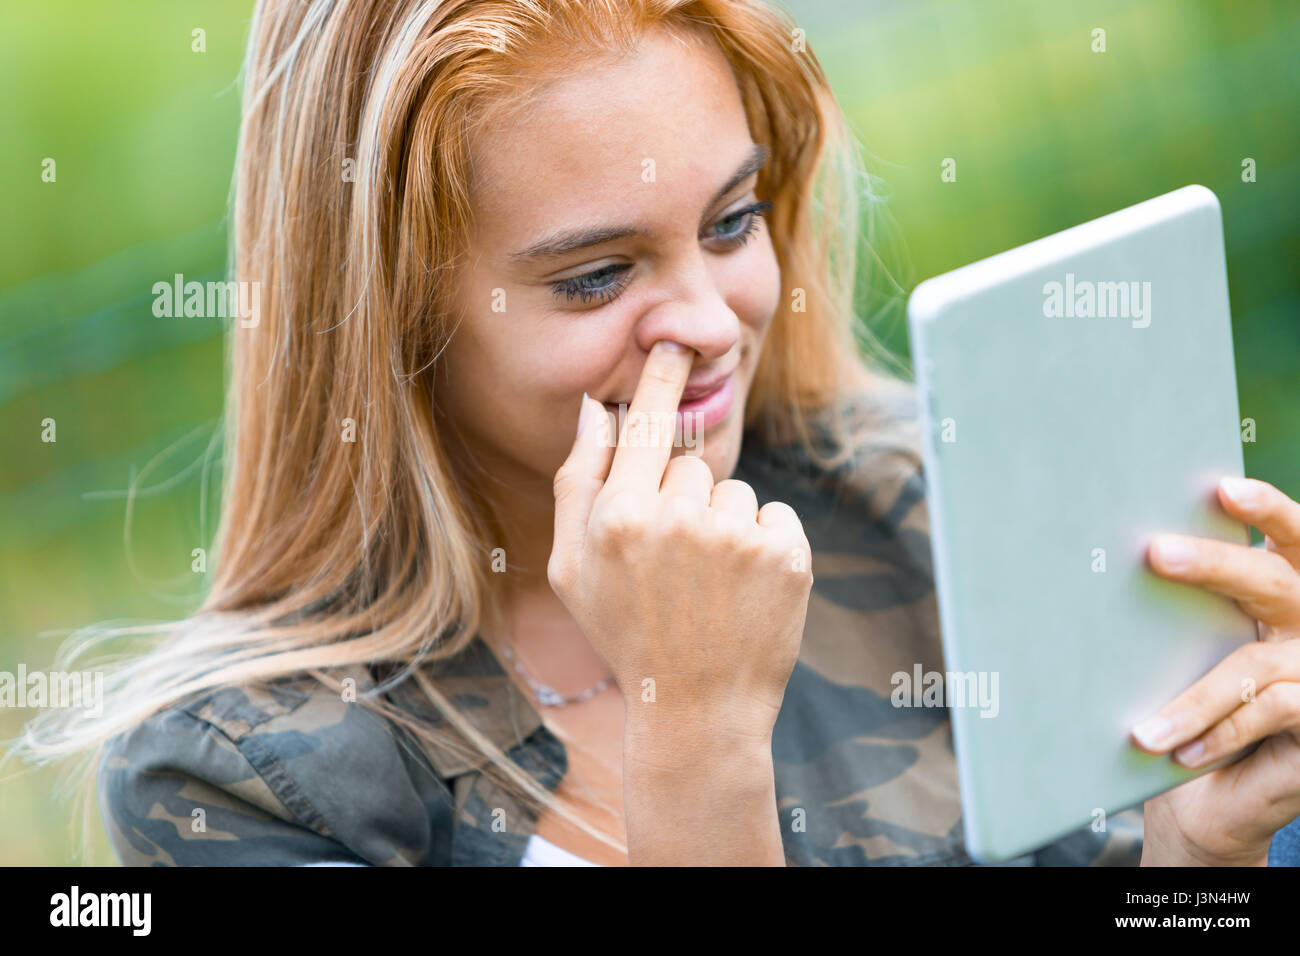 funny portrait of a girl picking her nose while reading on a digital tablet something she found out in the internet Stock Photo